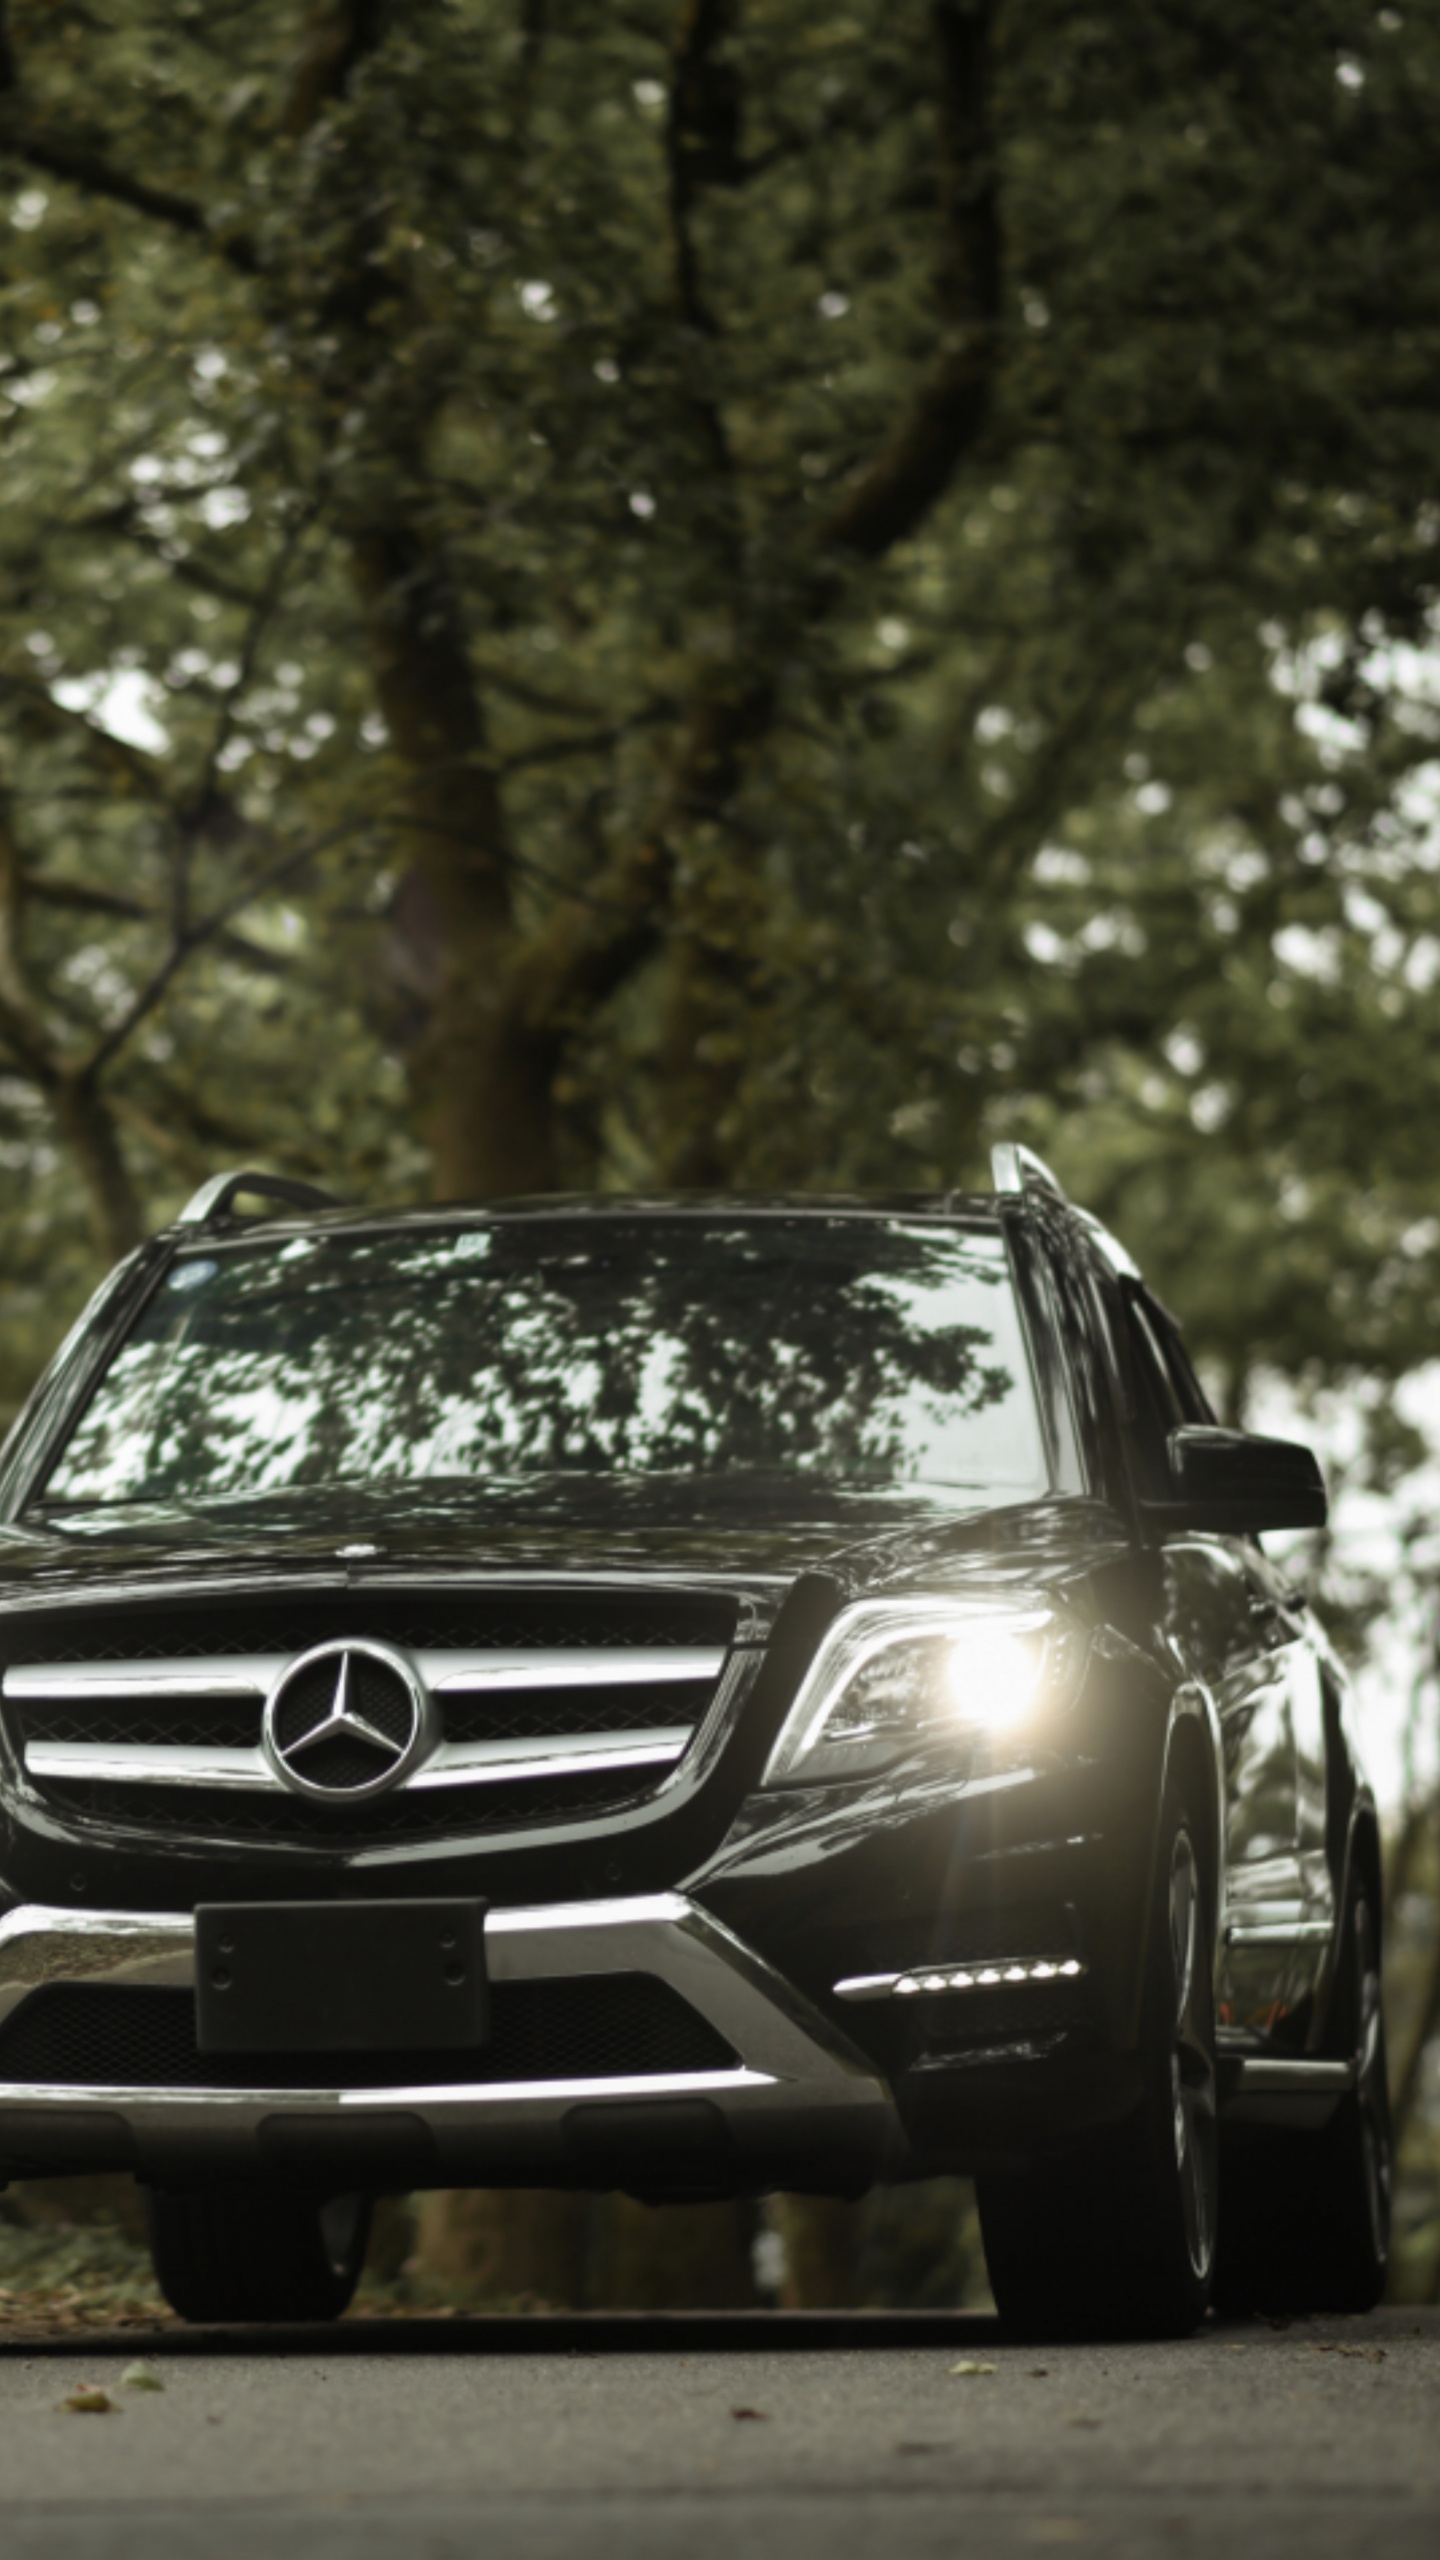 Black Mercedes Benz Car on Forest During Daytime. Wallpaper in 1440x2560 Resolution